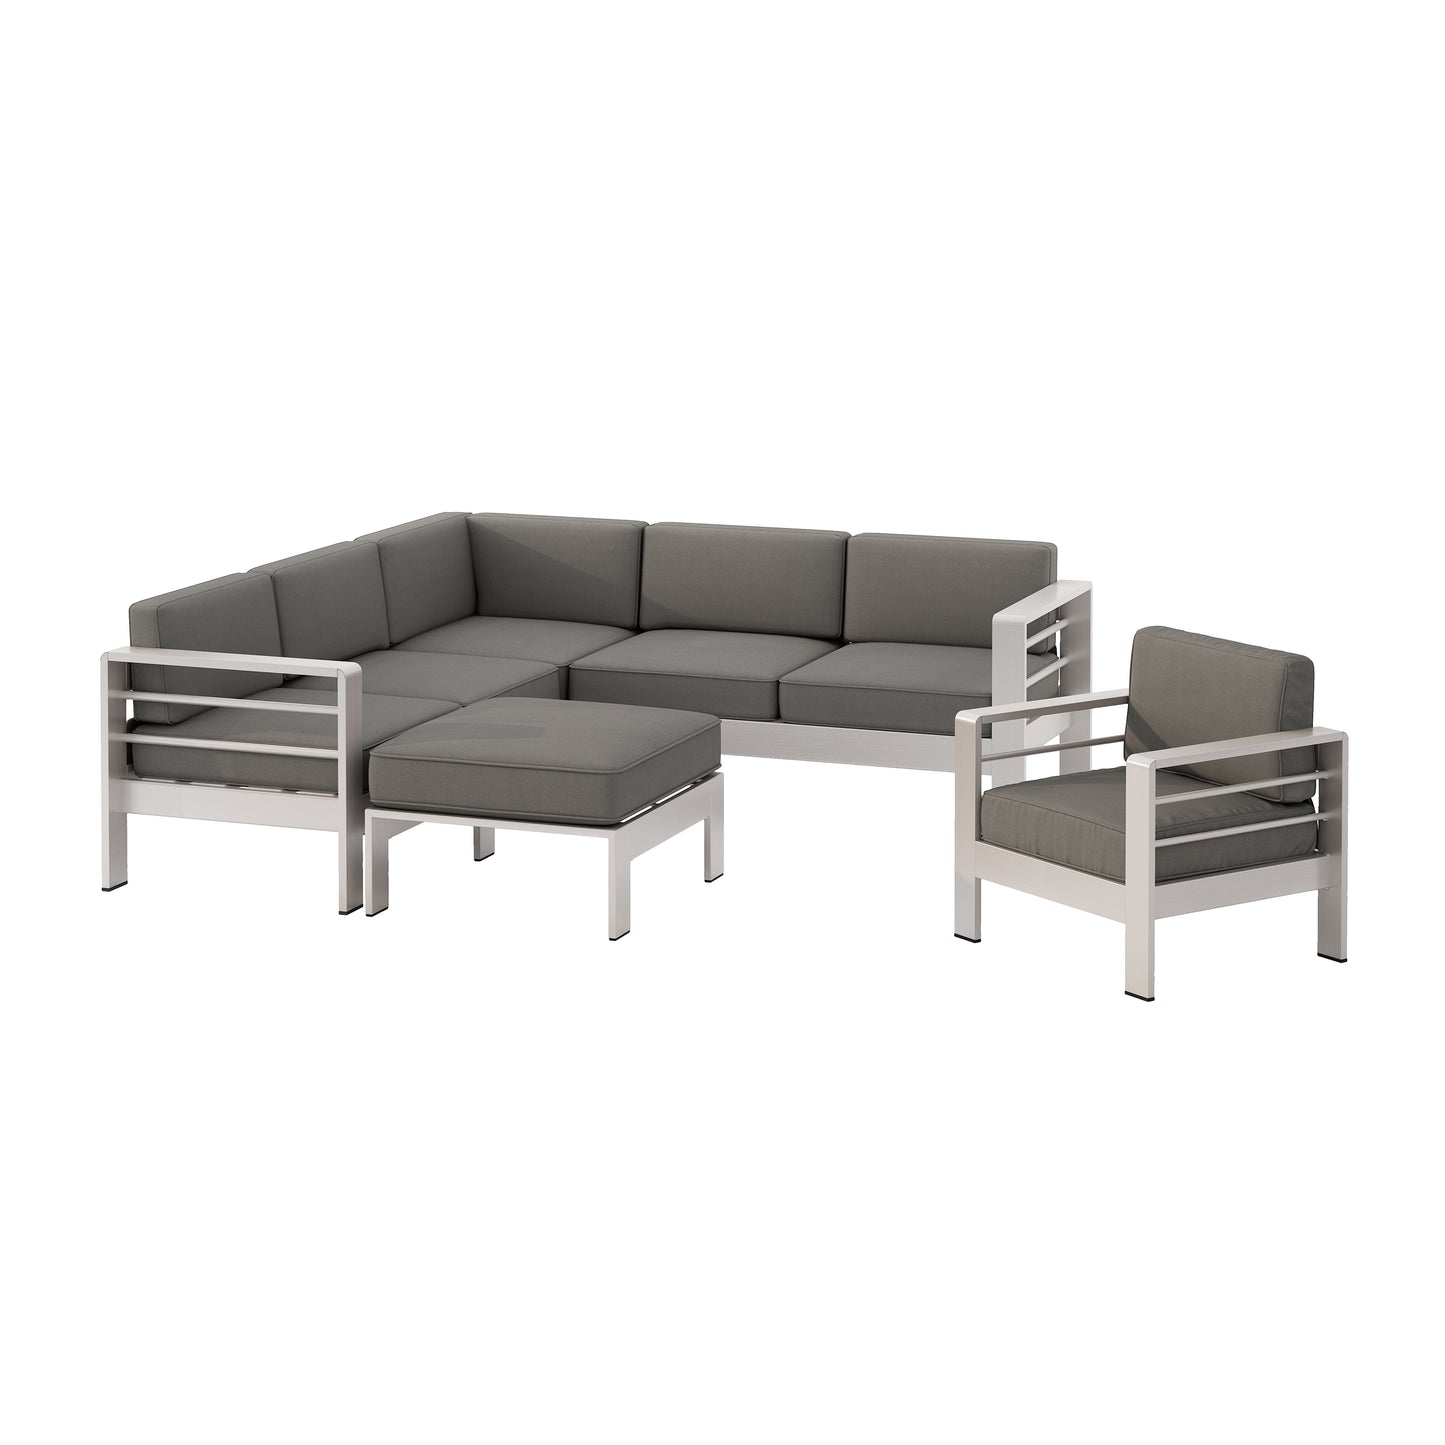 Emily Coral Outdoor Aluminum 6-Seater V-Shaped Sectional Sofa Set with Ottoman